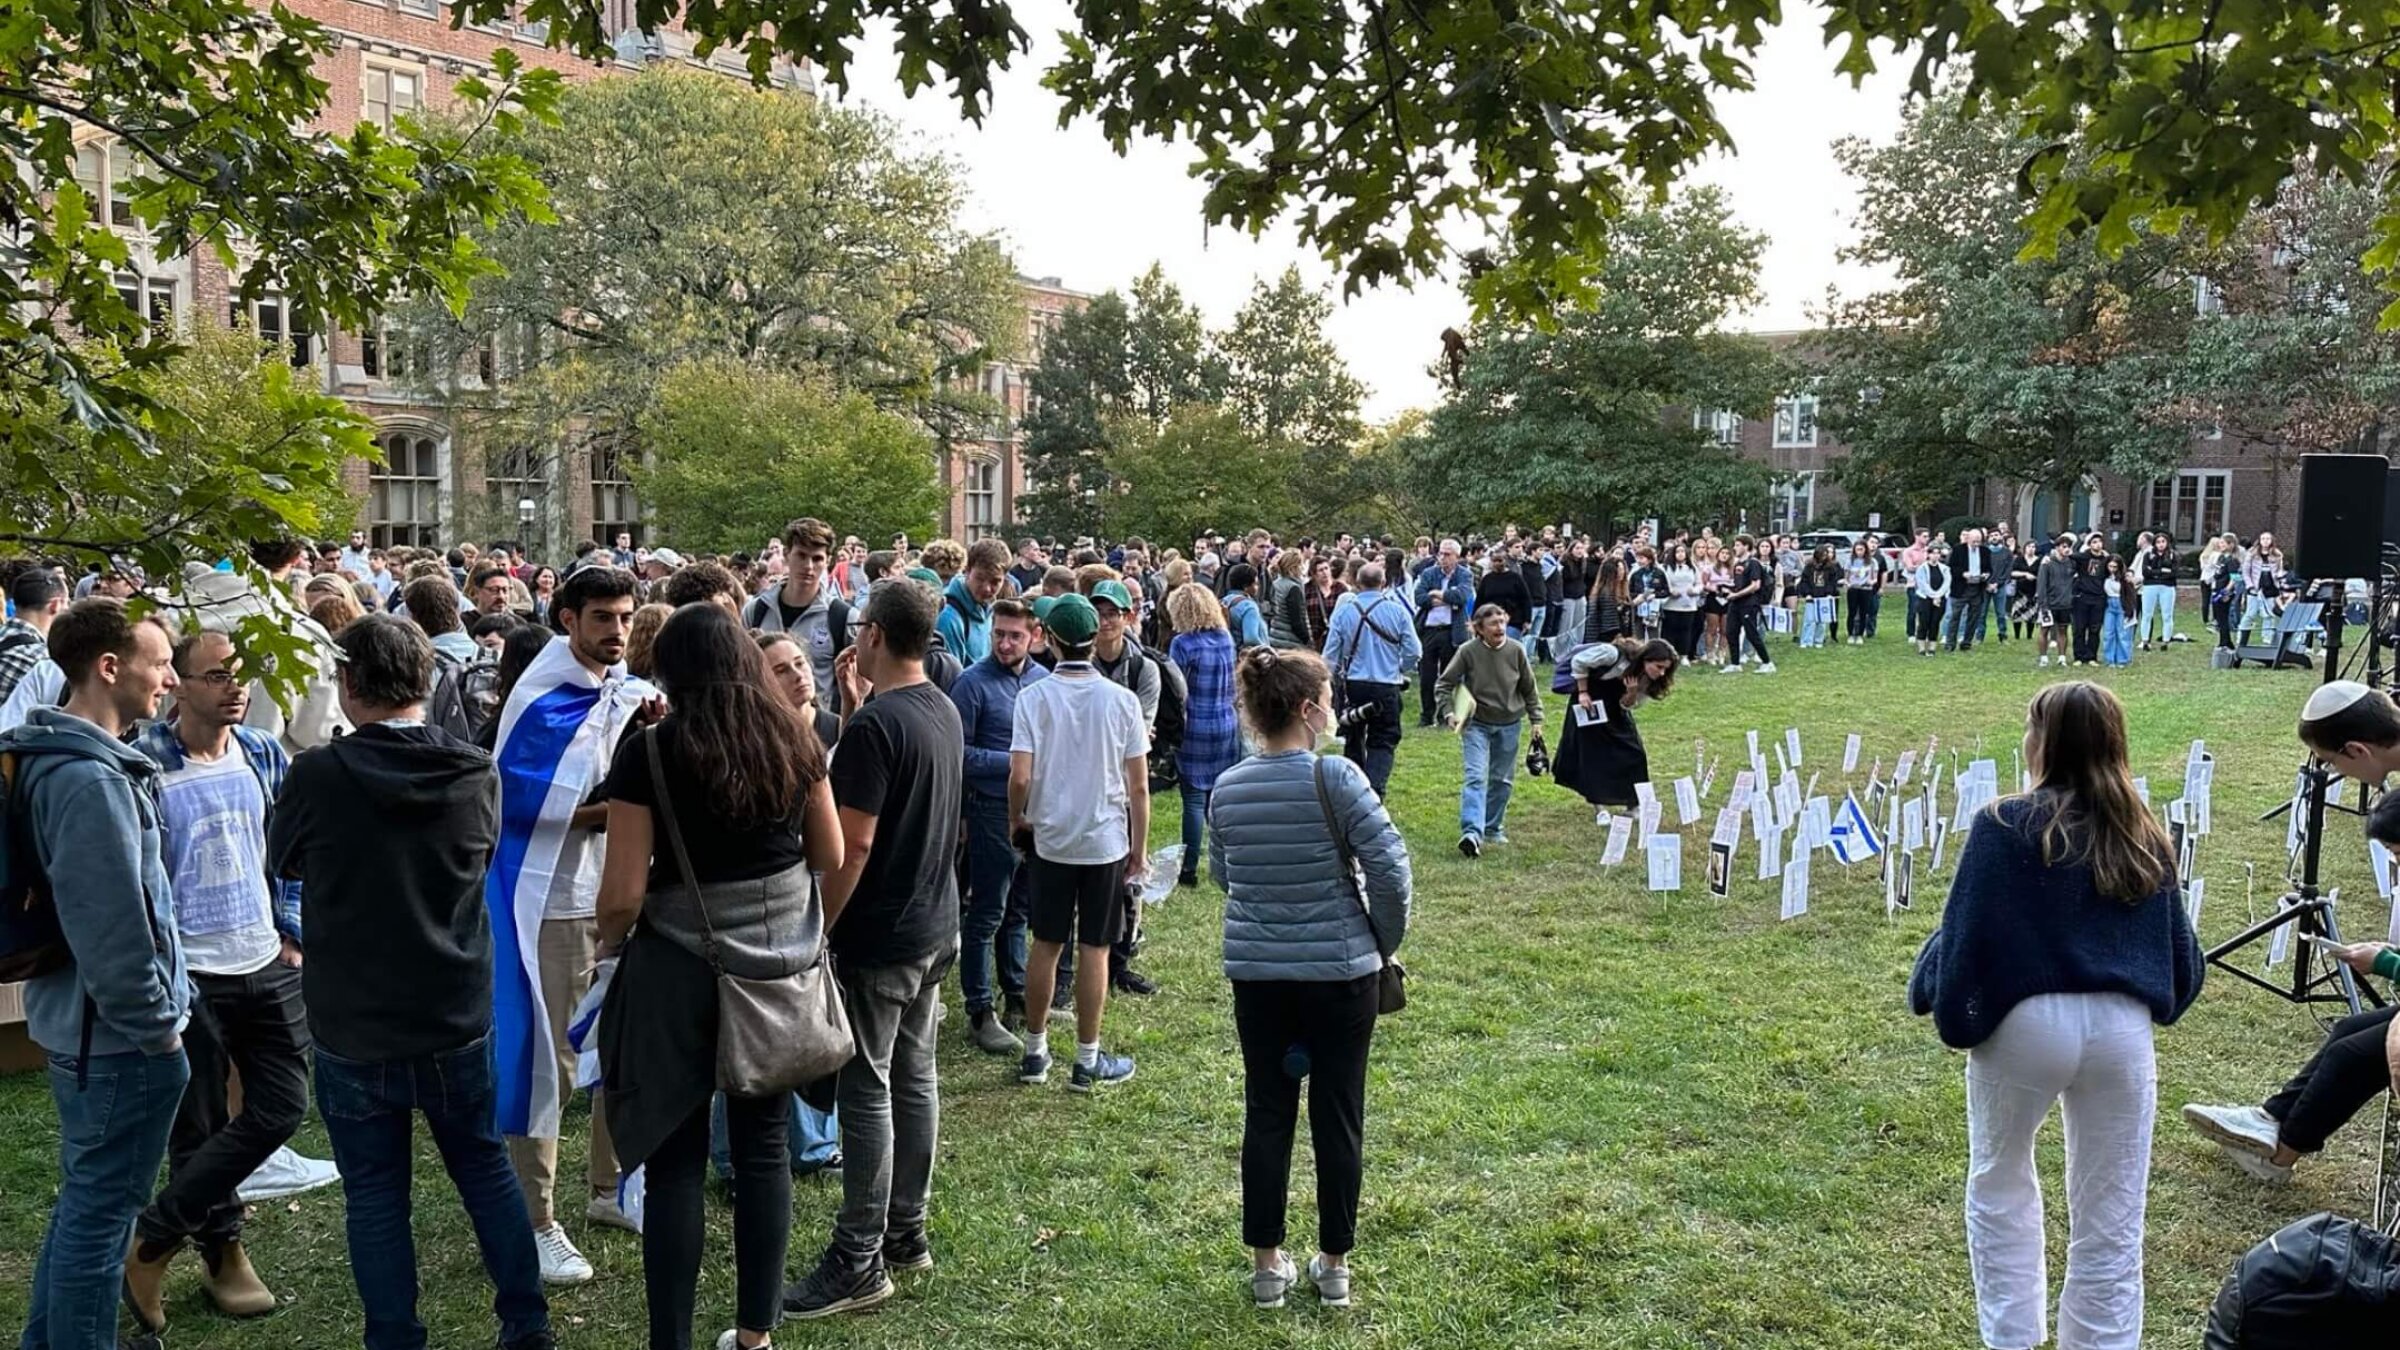 Following the Oct. 7 terrorist attacks, over 400 people attended a vigil at Princeton University. Courtesy of Julie Levey